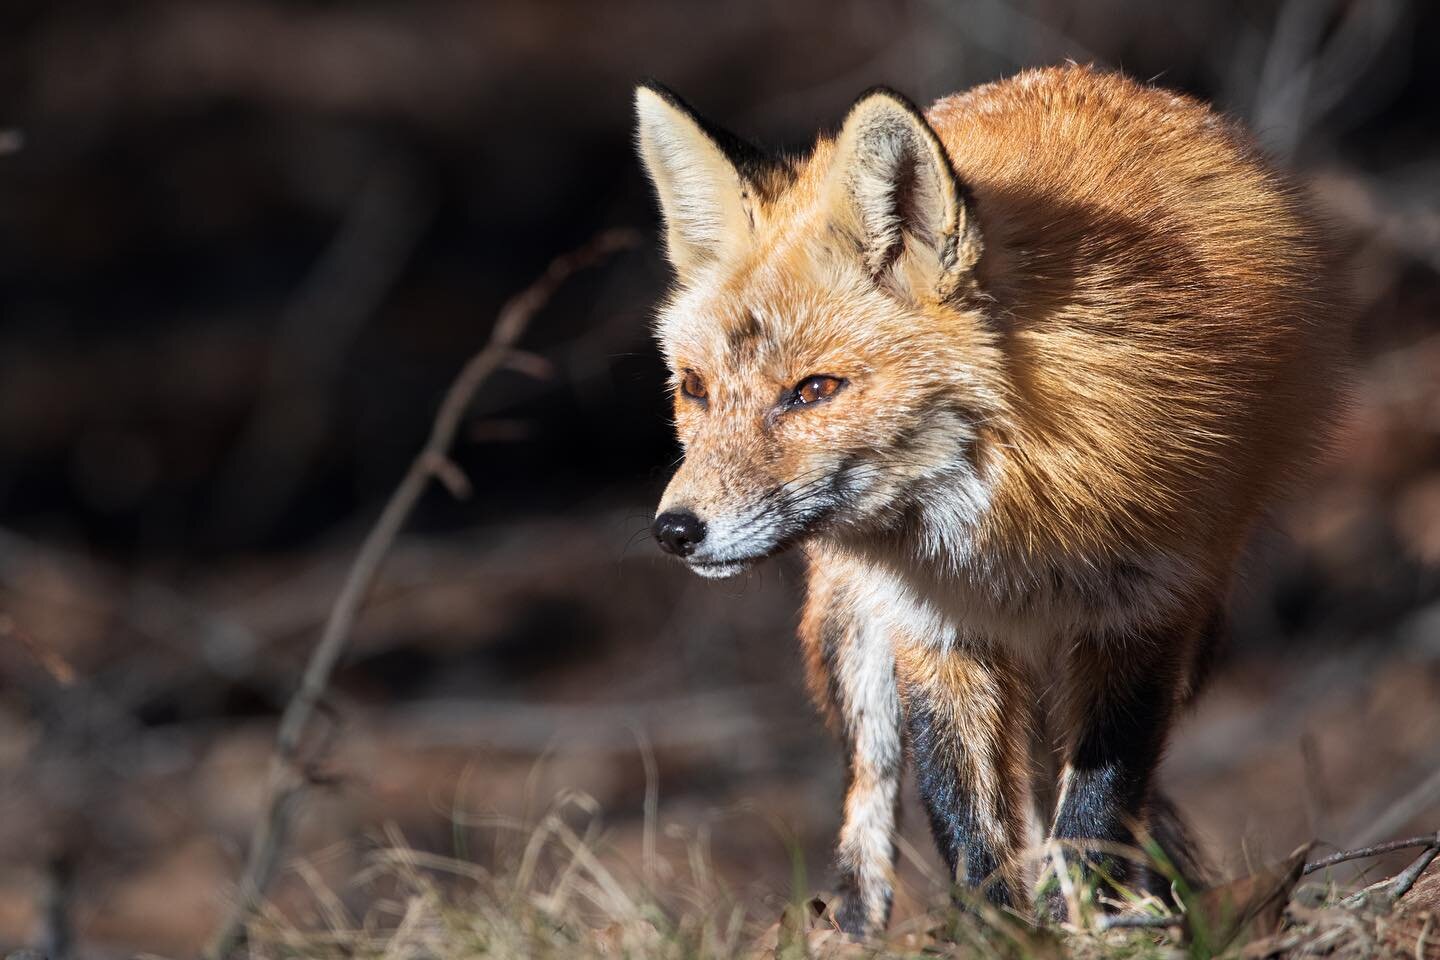 SWIPE 👉🏼 for a closeup 👀 

A male fox on the prowl. You can see missing fur from a wound healing between his eyes, likely from fighting off another male during the mating season which takes place in January-February. I&rsquo;ve grown familiar with